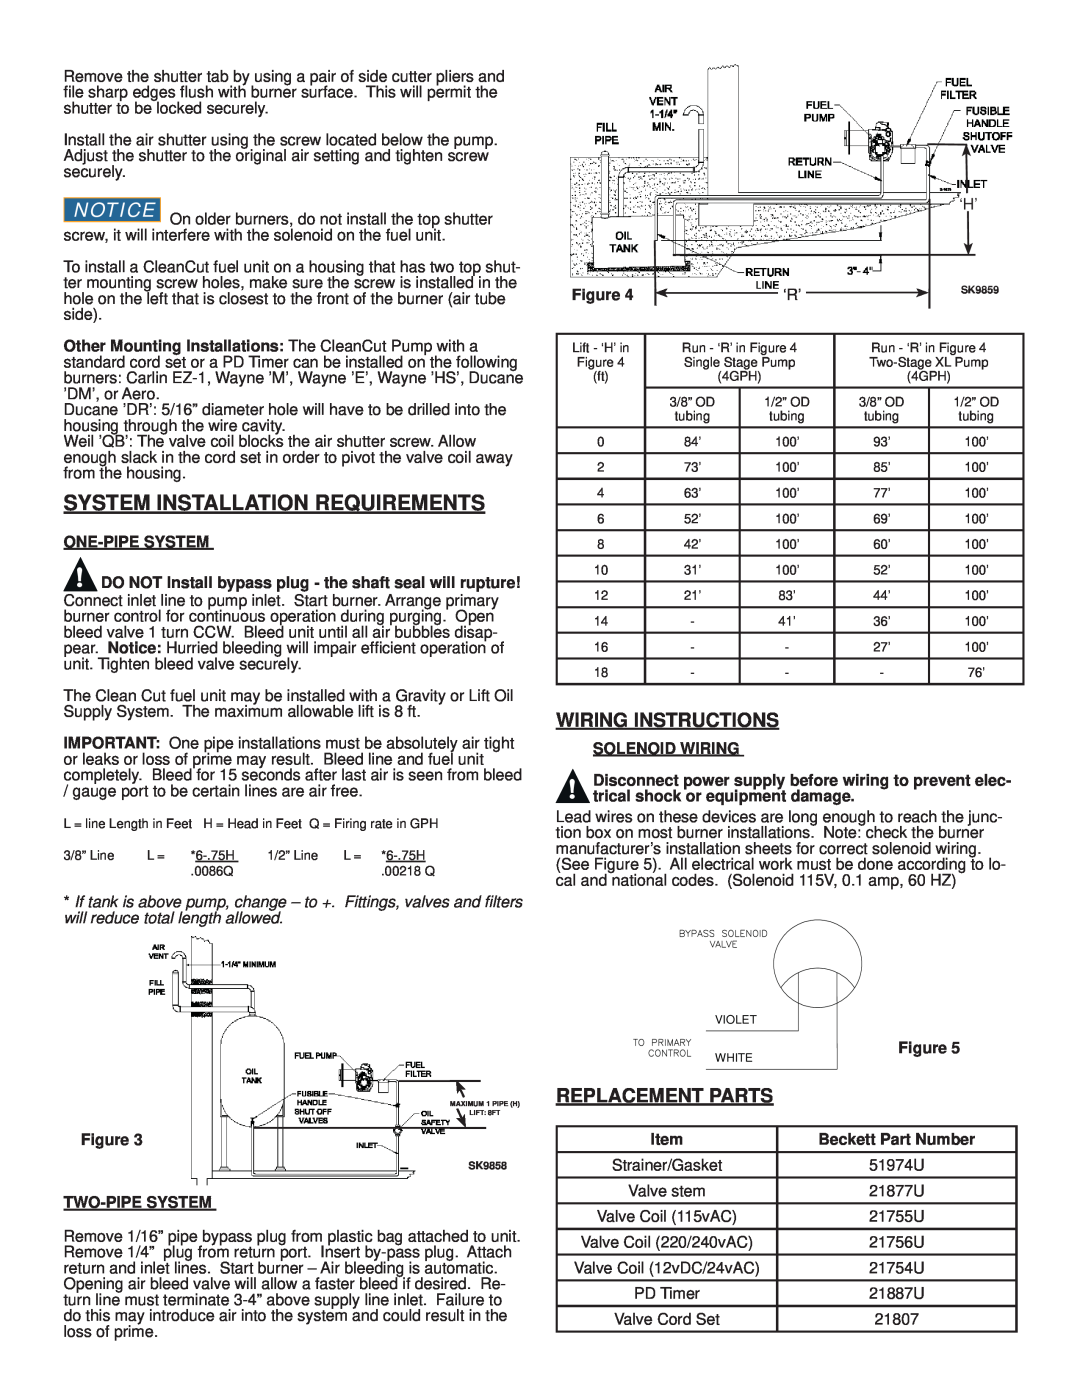 Beckett 21844, 21941 installation manual Wiring Instructions, System Installation Requirements, Replacement Parts 